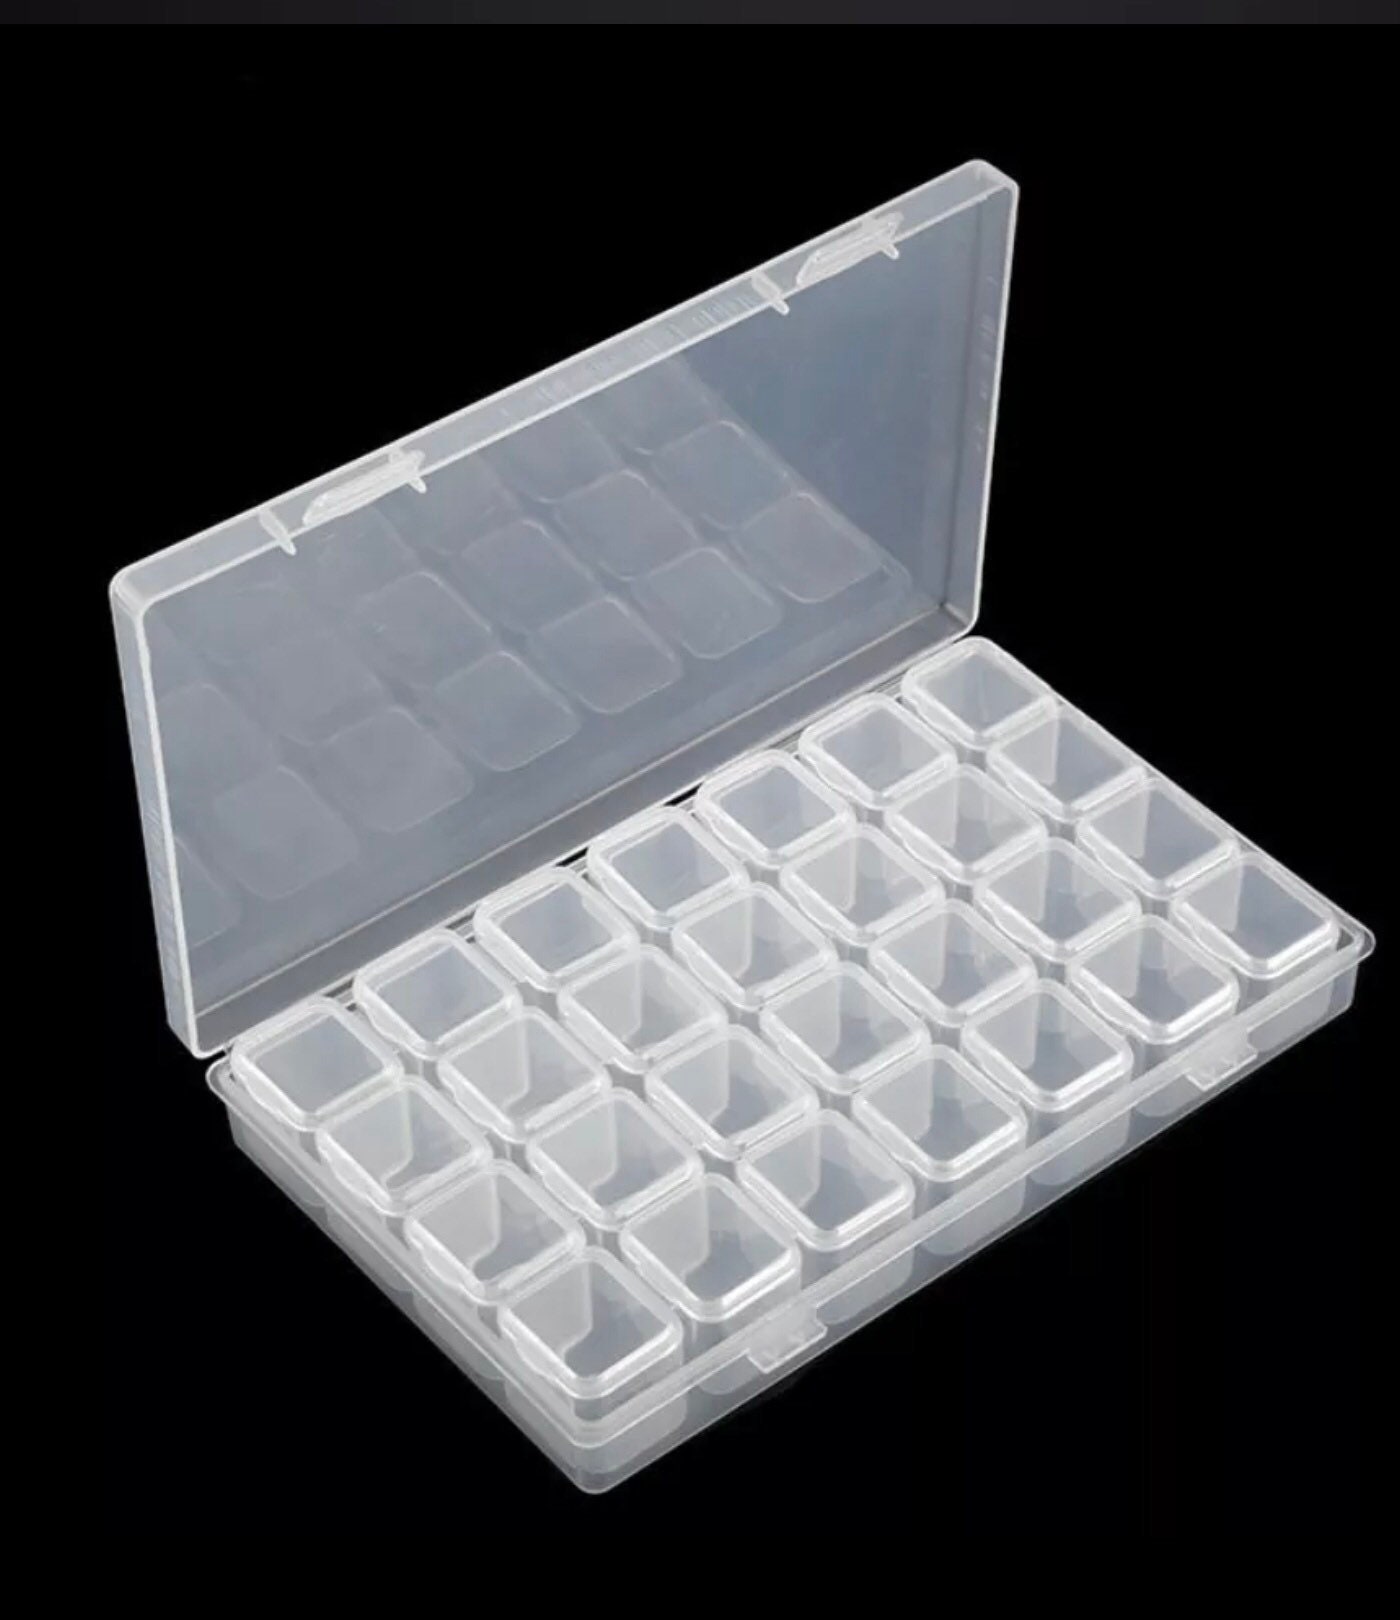 Bead Storage Box, Plastic Craft Box, Jewelry Organizer Container, Clear Box  With Dividers 10 Grids, Gift for Beader, 5x2.5x1 In, 2 Pack 